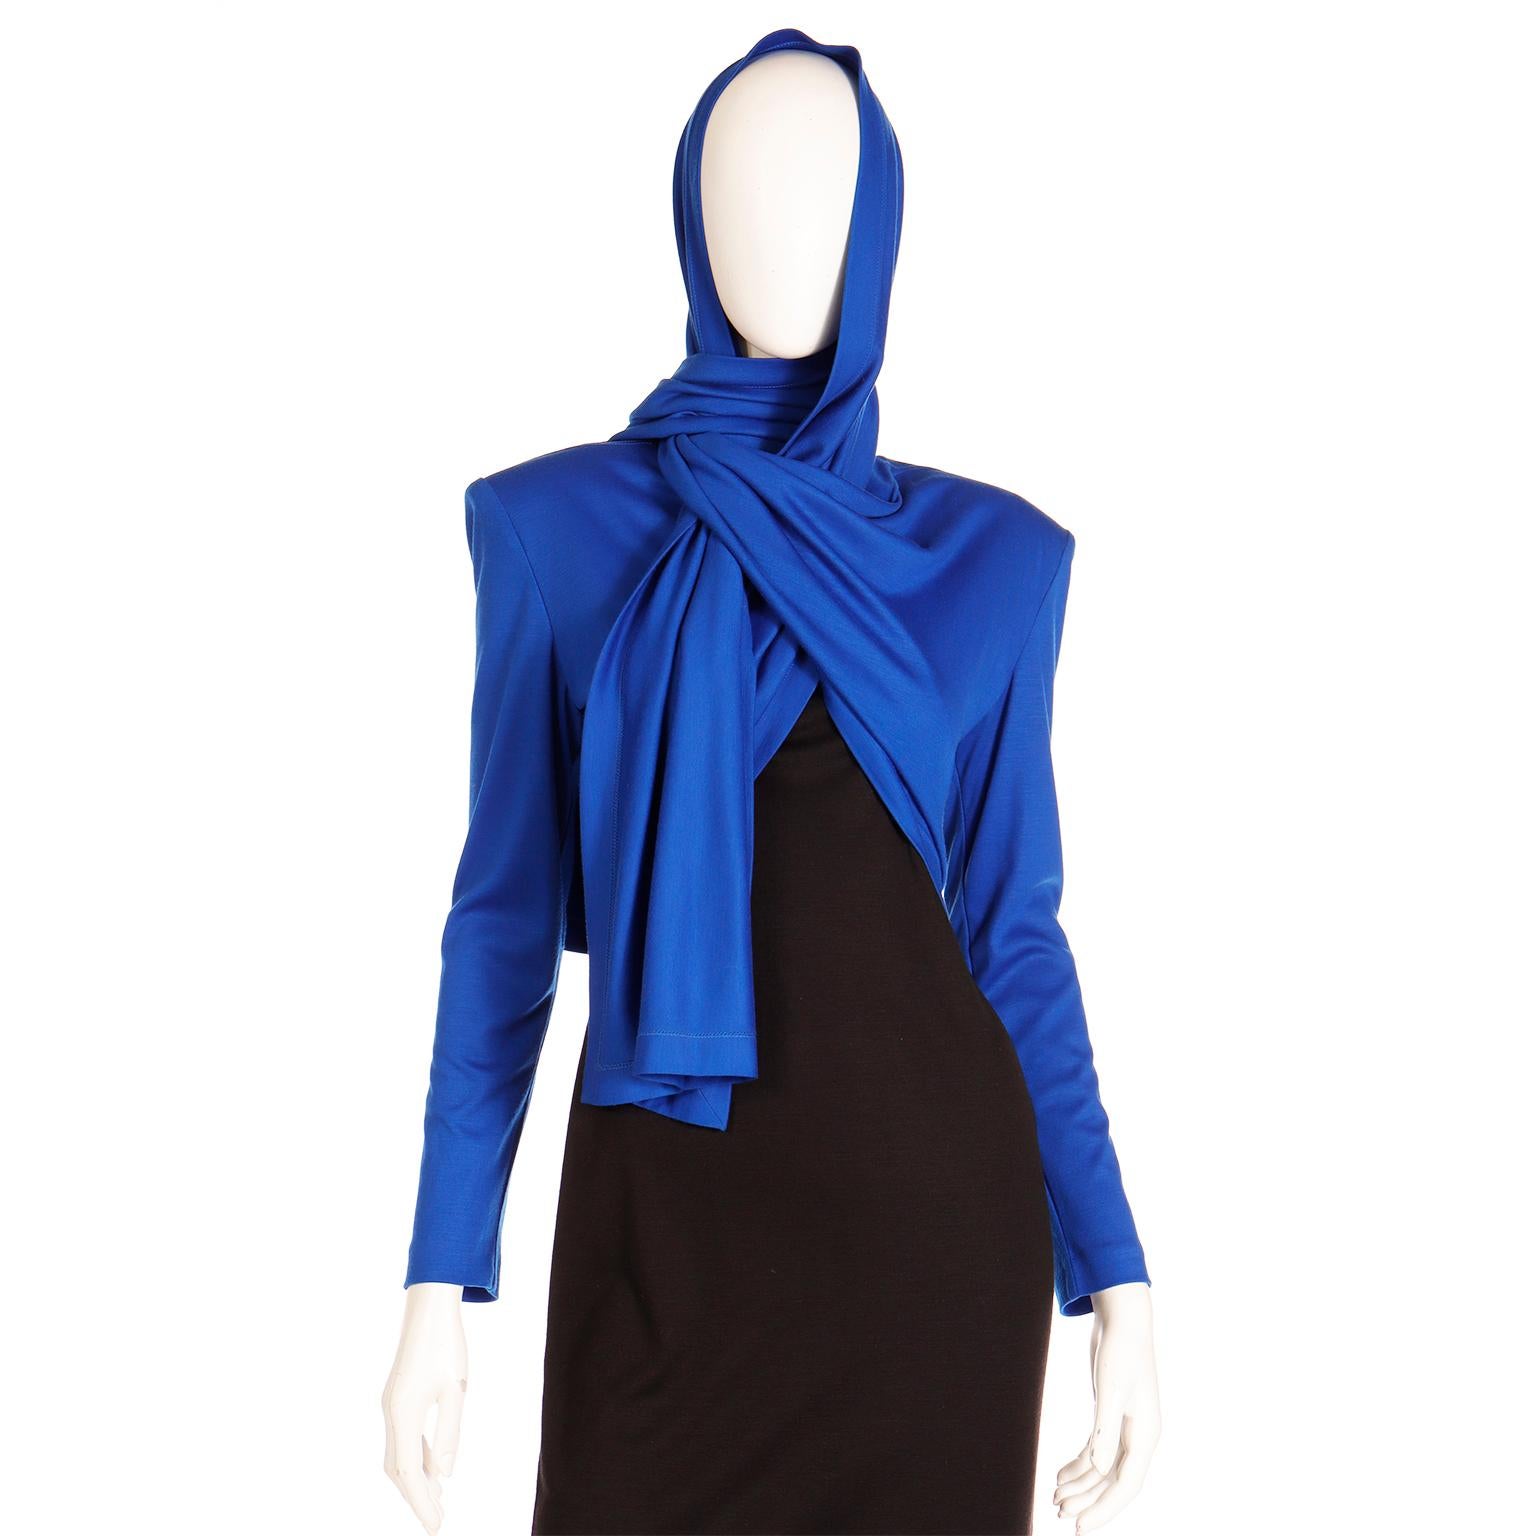 FW 1989 Patrick Kelly Runway Dress in Blue & Black Knit with Head Scarf  For Sale 12